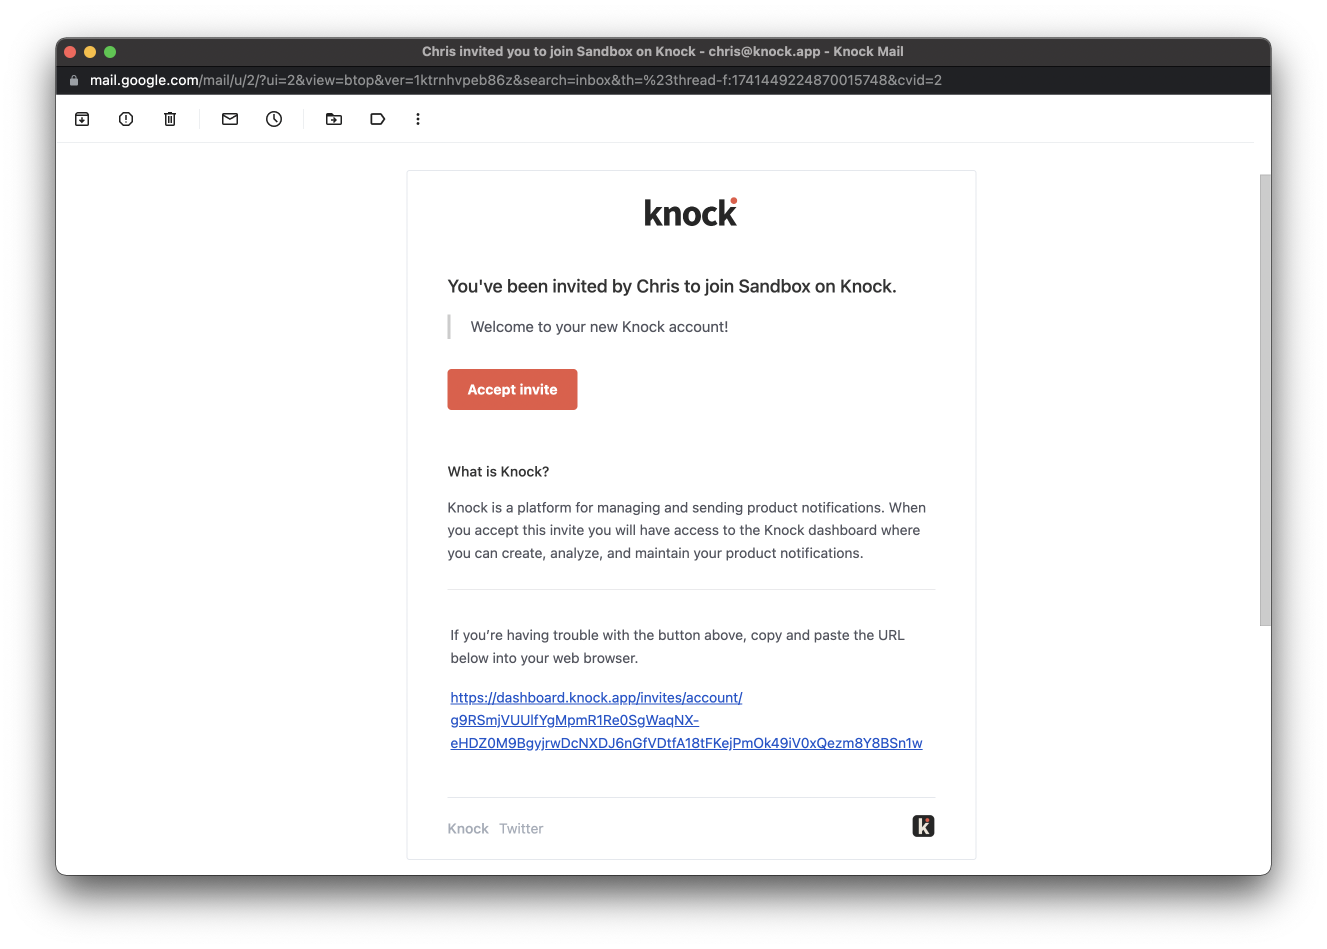 A Knock invite email